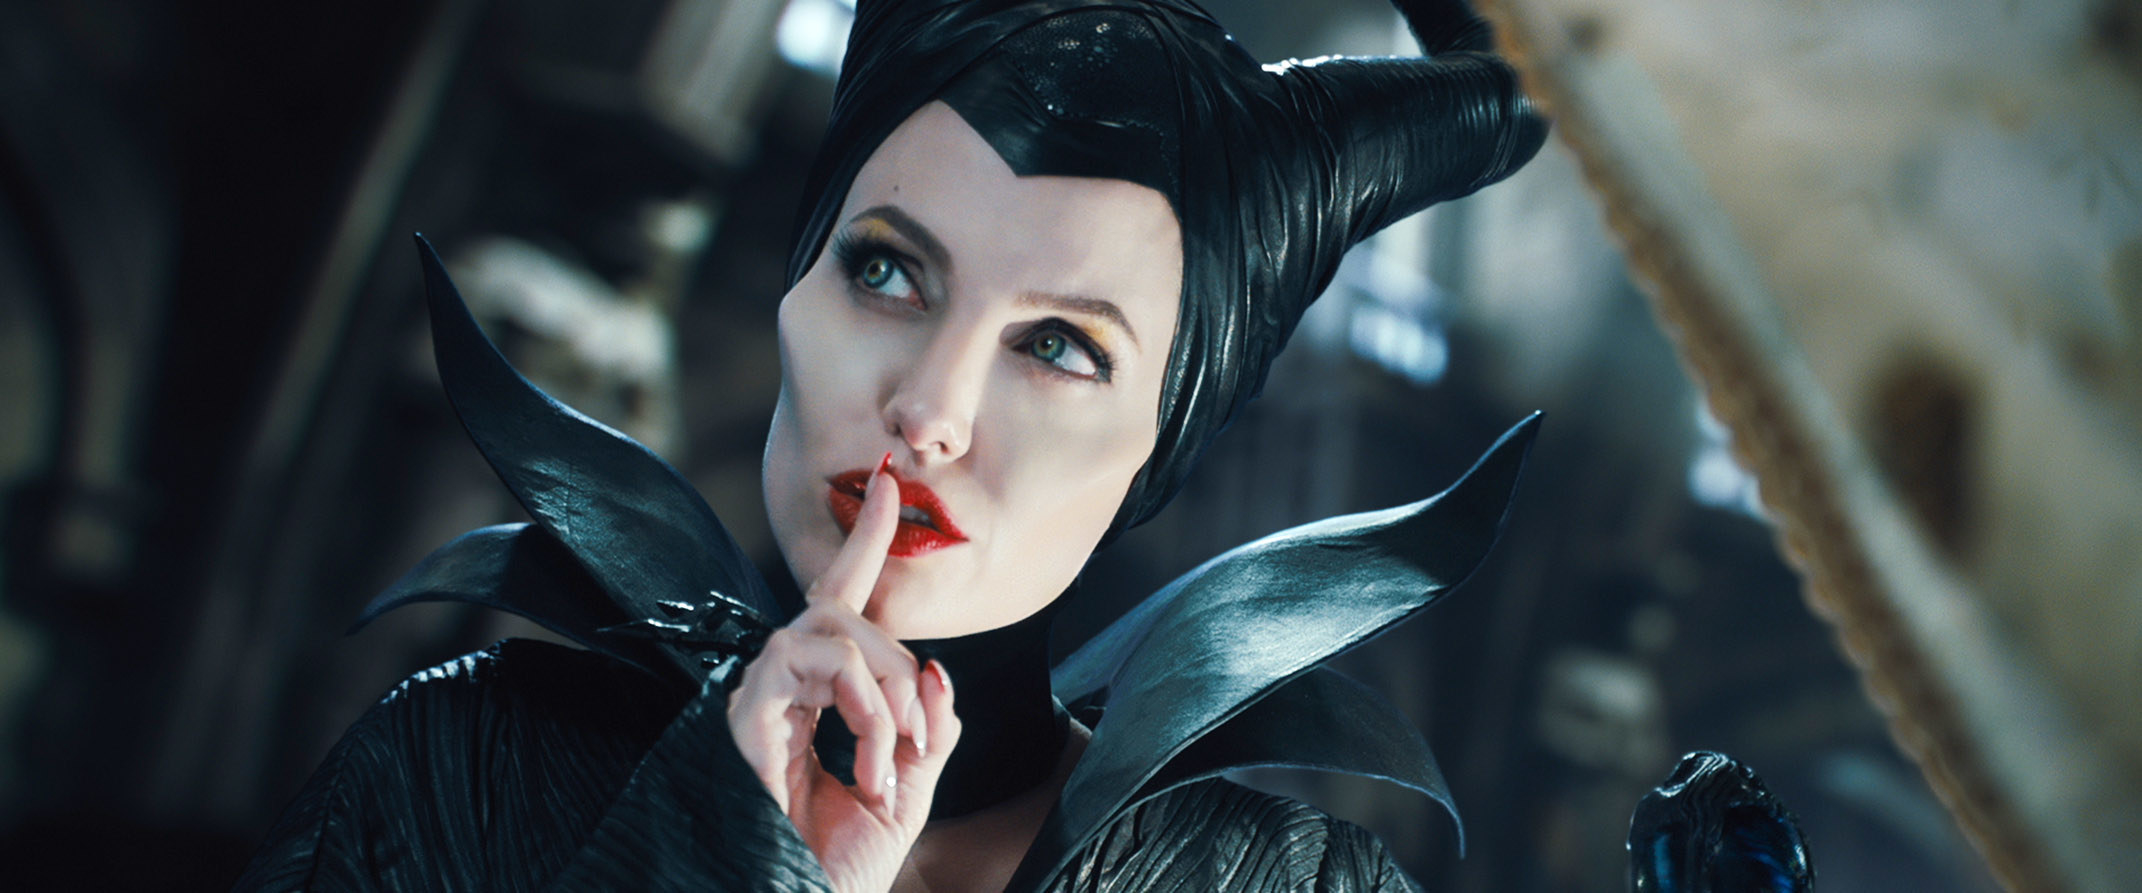 Angelina as Maleficent